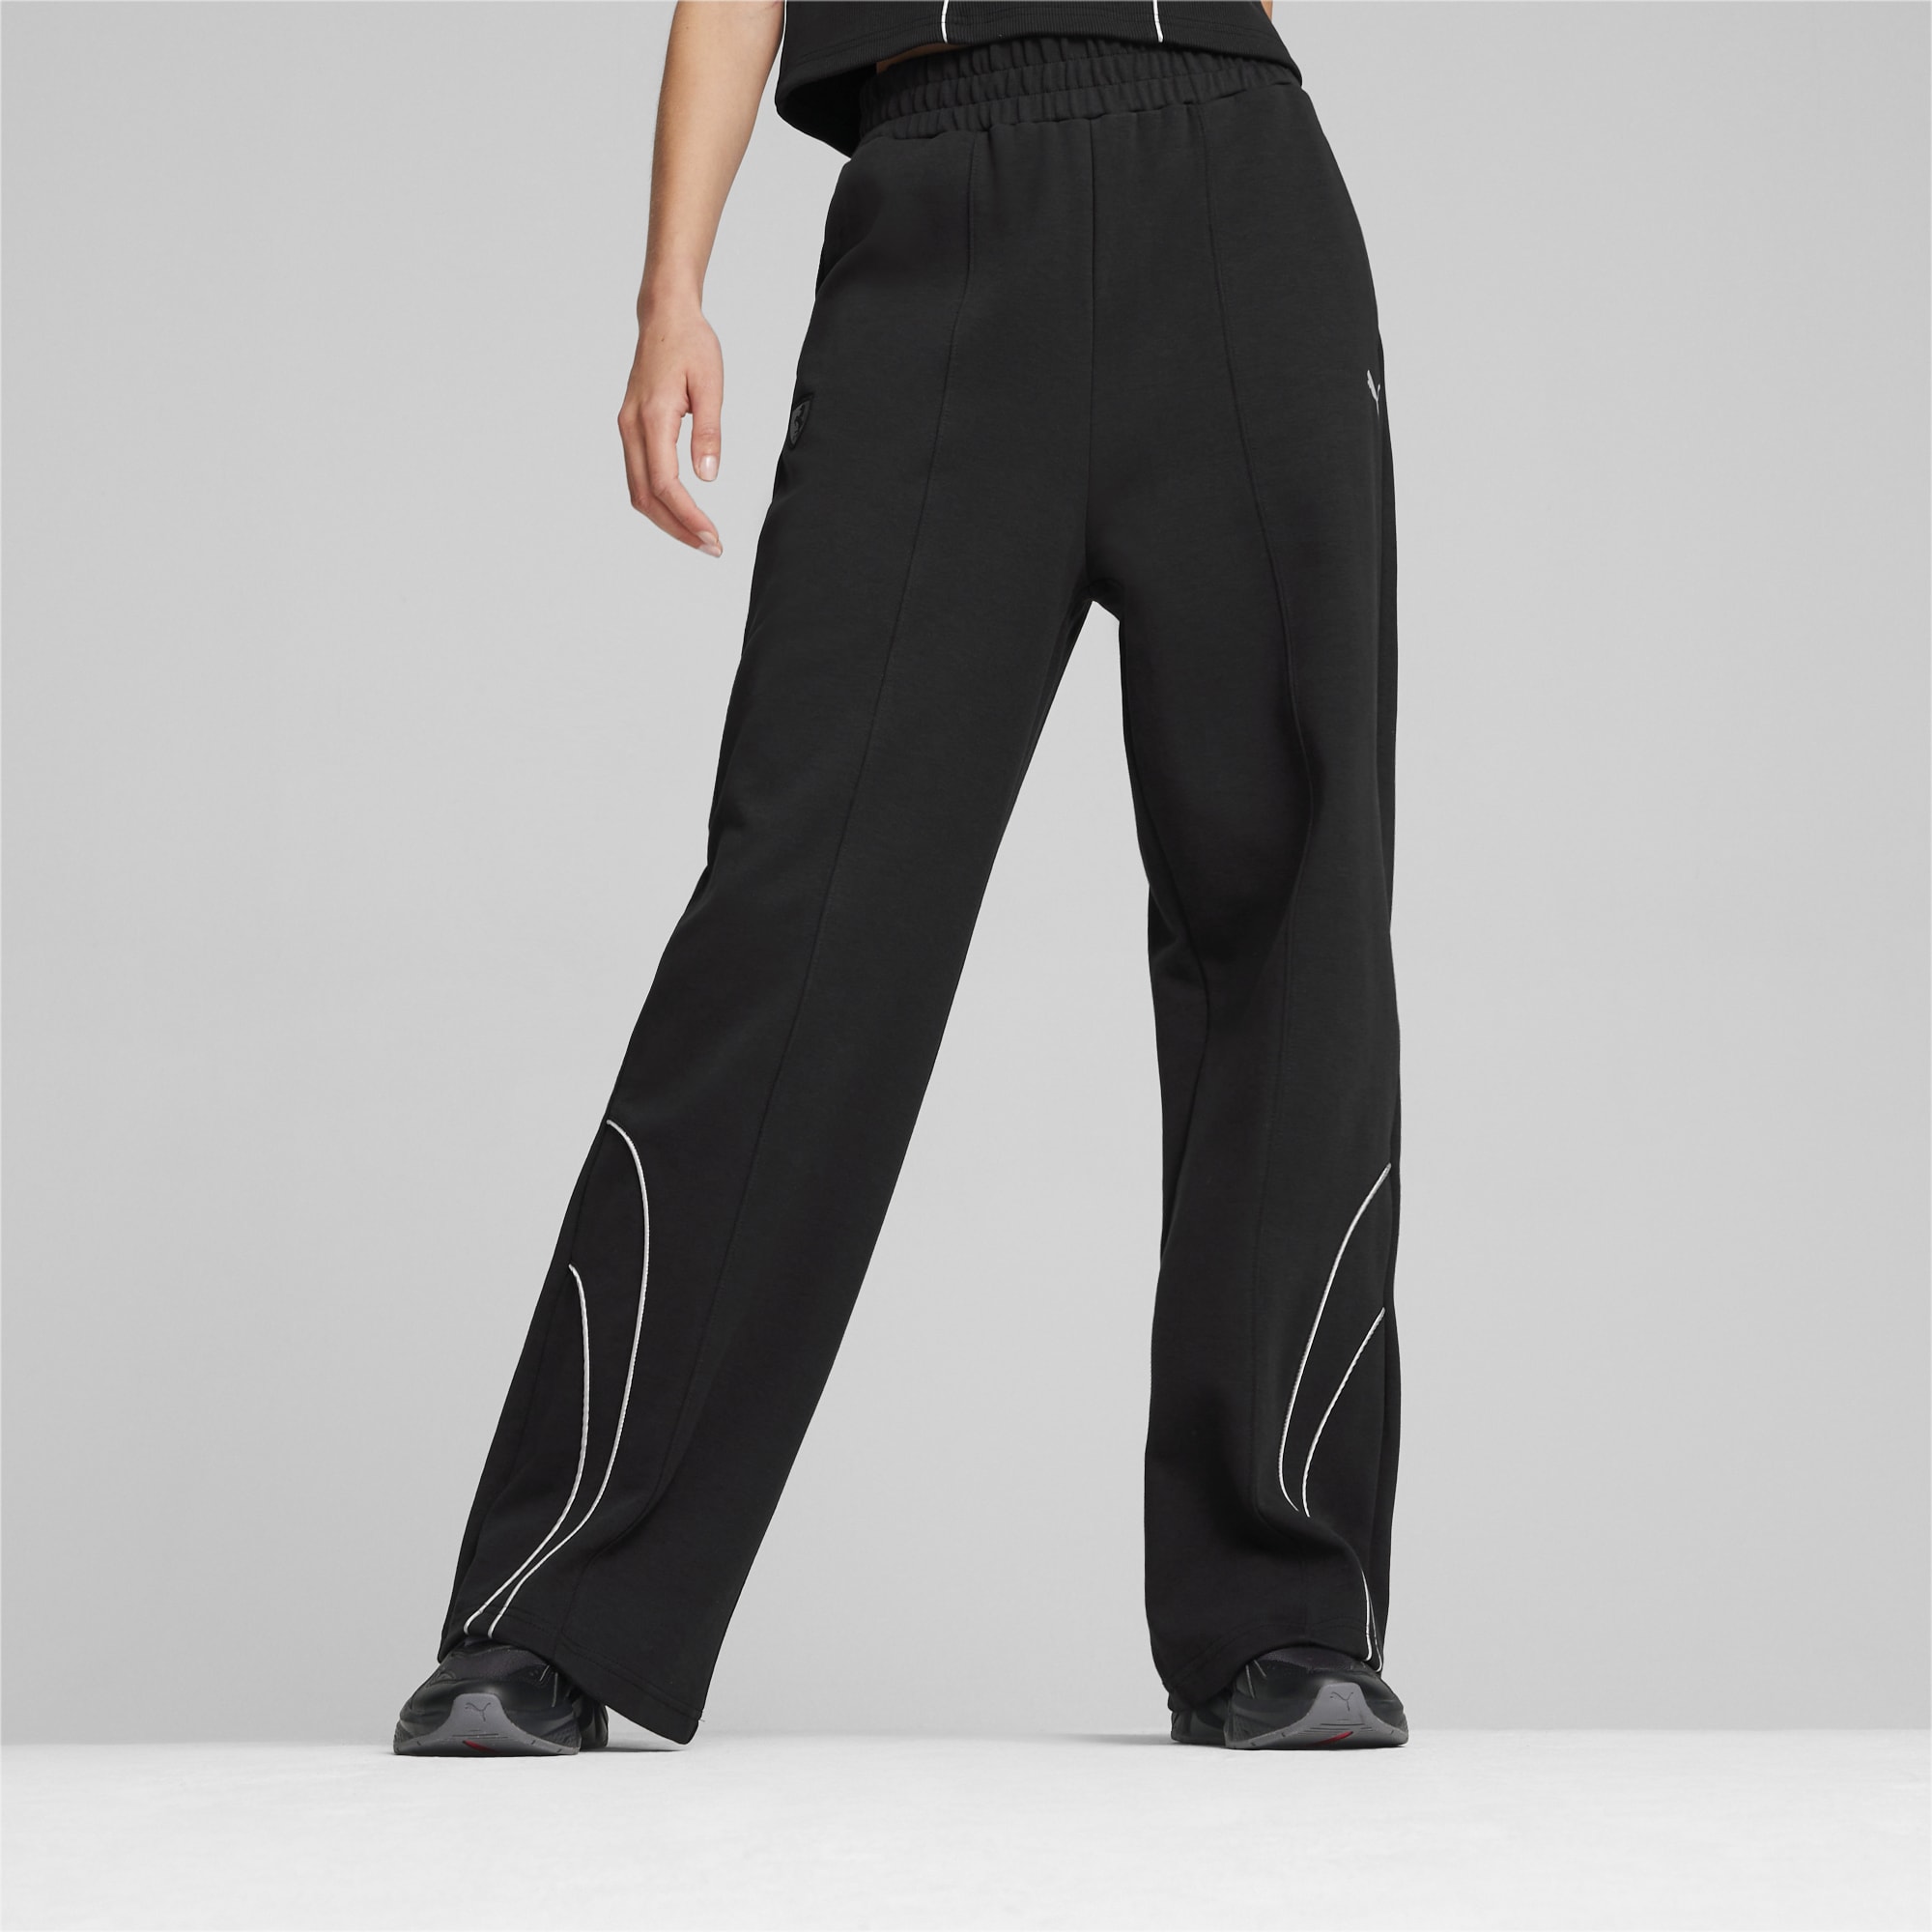 Buy Grey Check Shapewear Boot Cut Trousers from Next Luxembourg